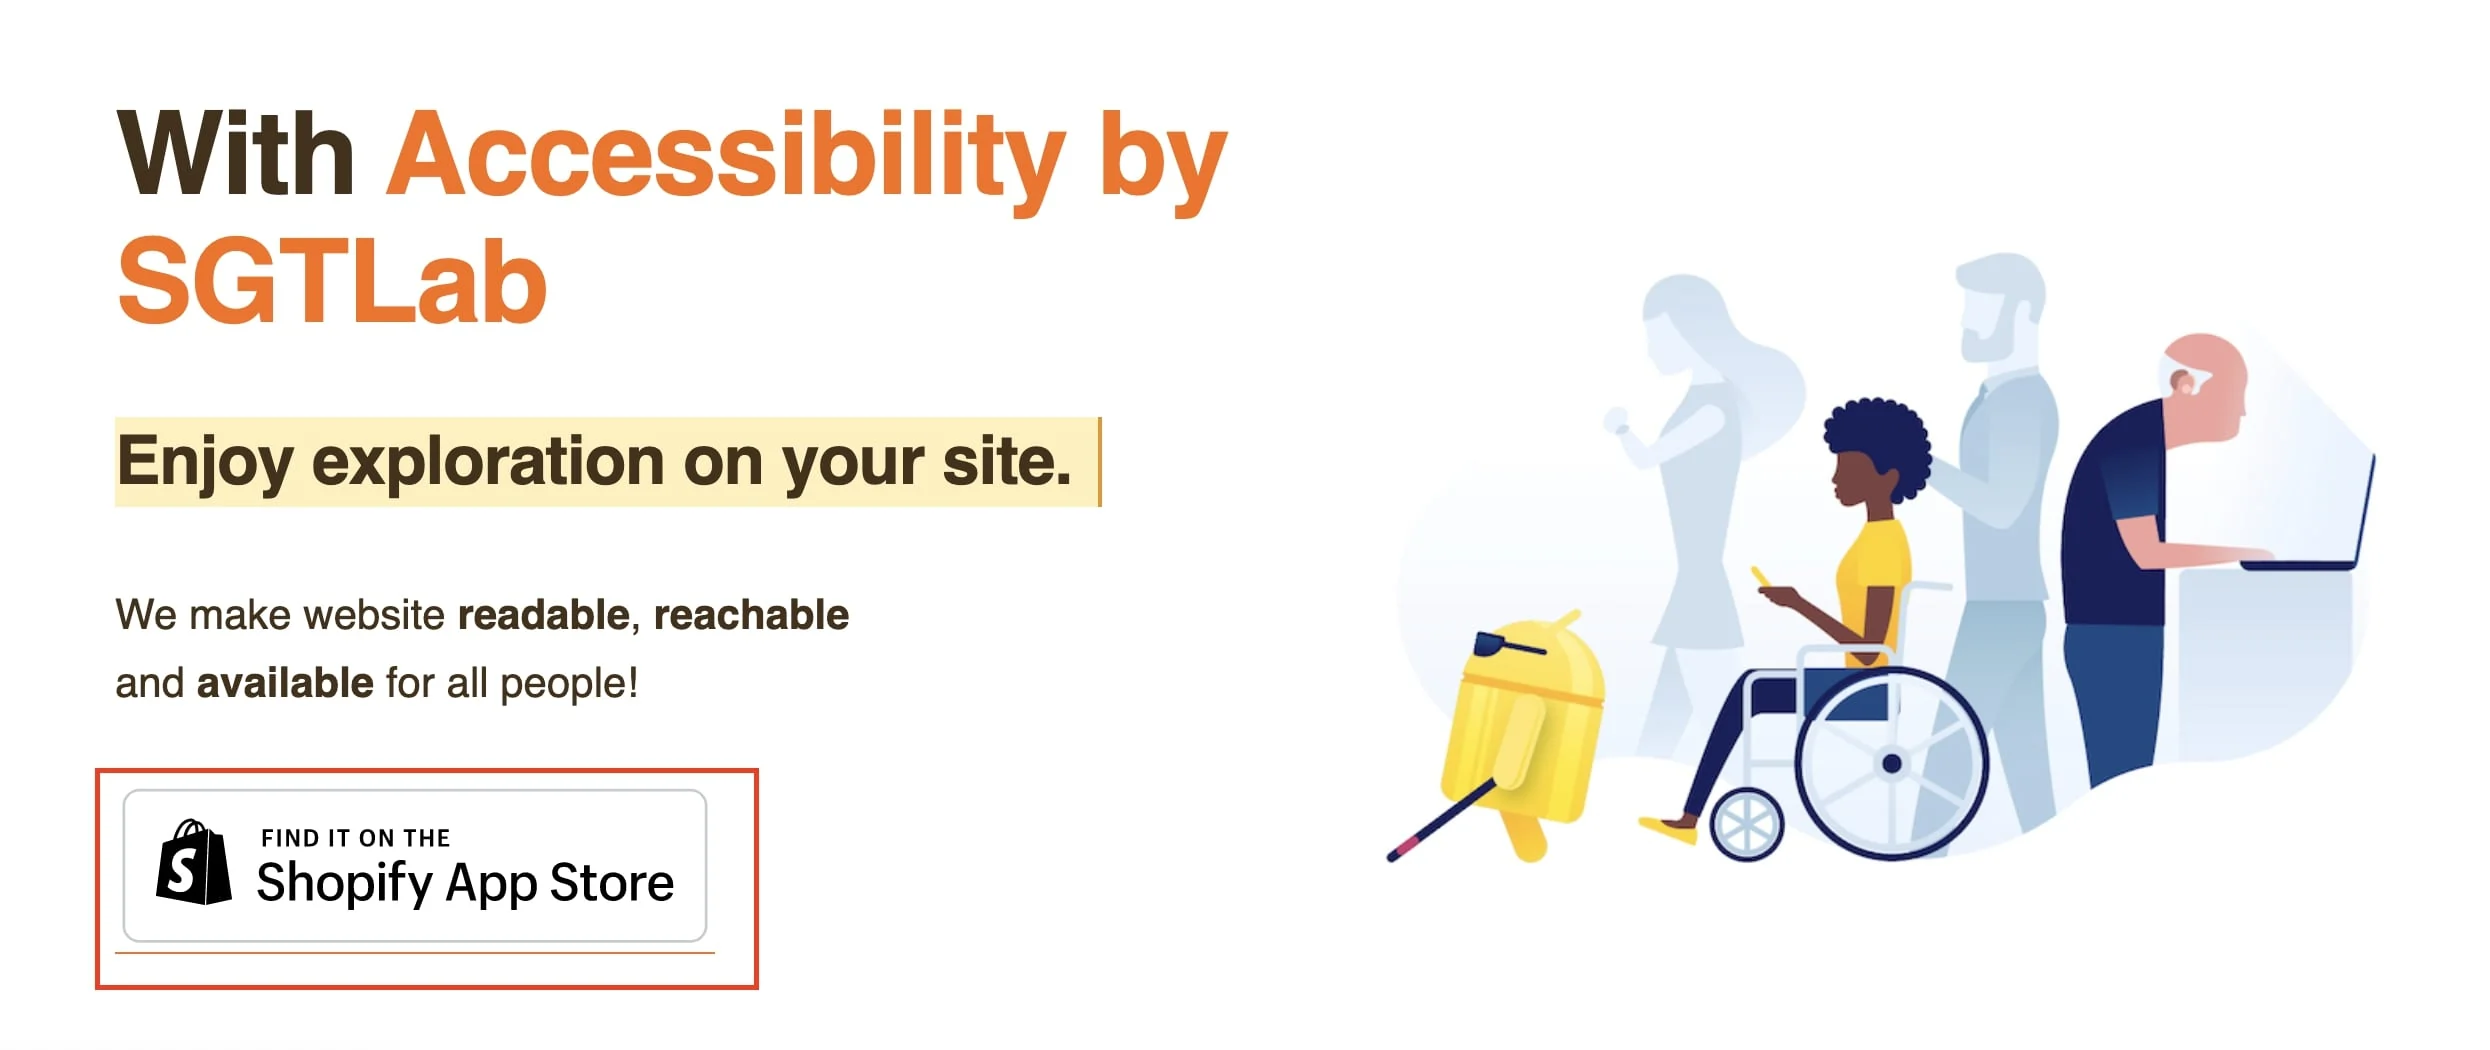 Look for Find it on the Shopify App Store banner and click on it to go to Accessibility product page.